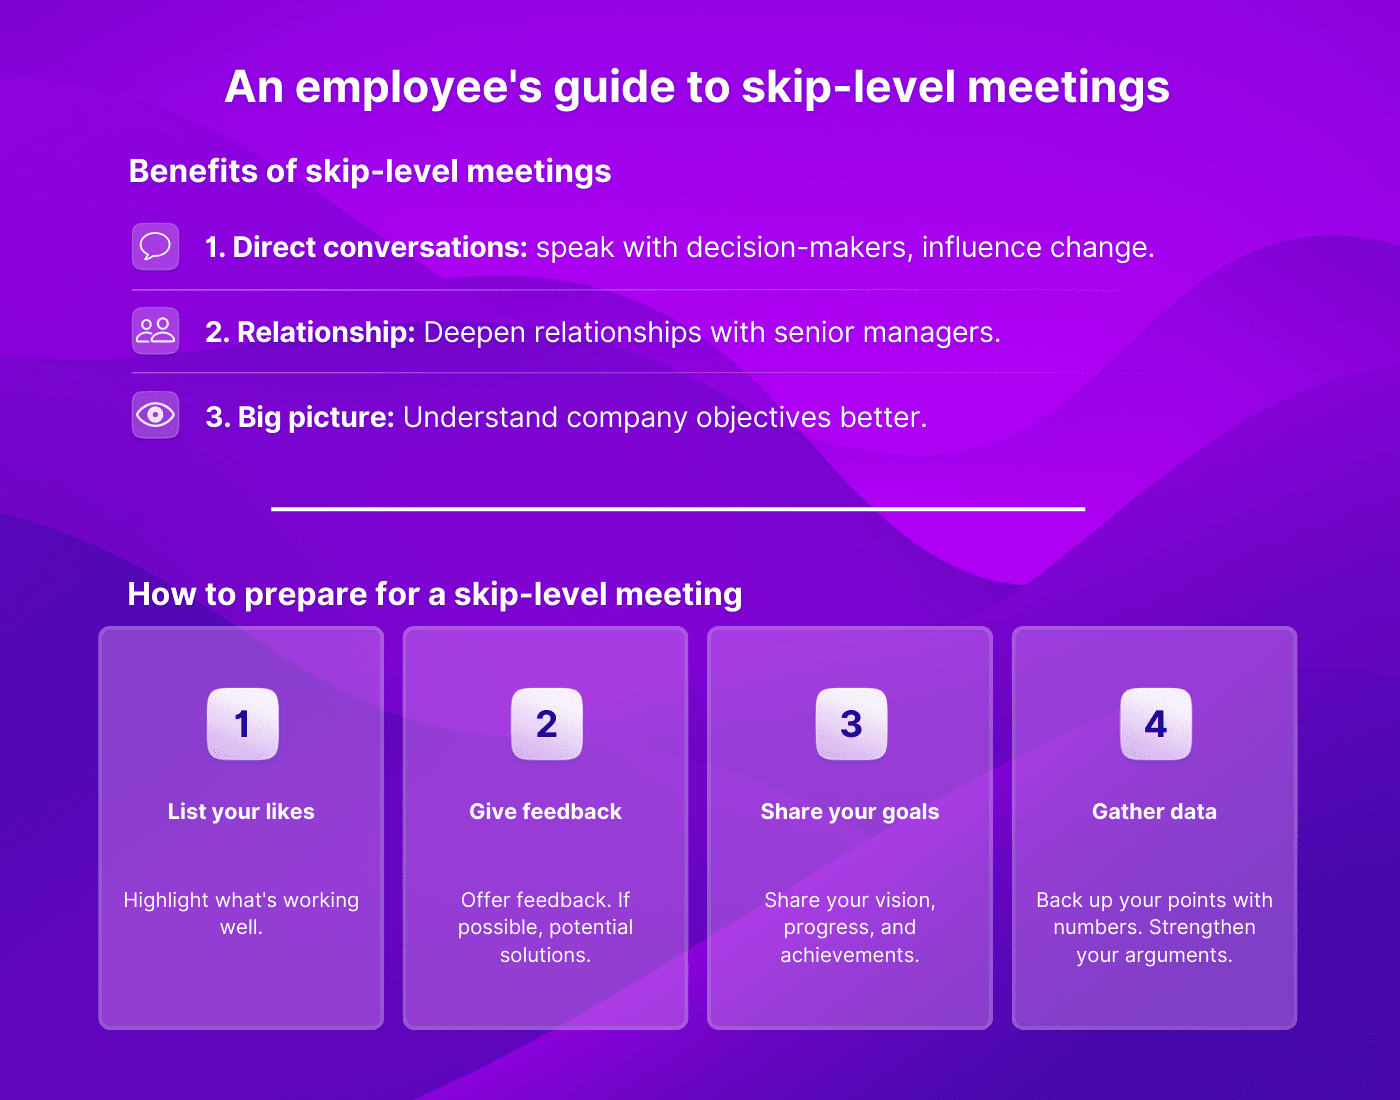 An infographic about skip level meetings for employees